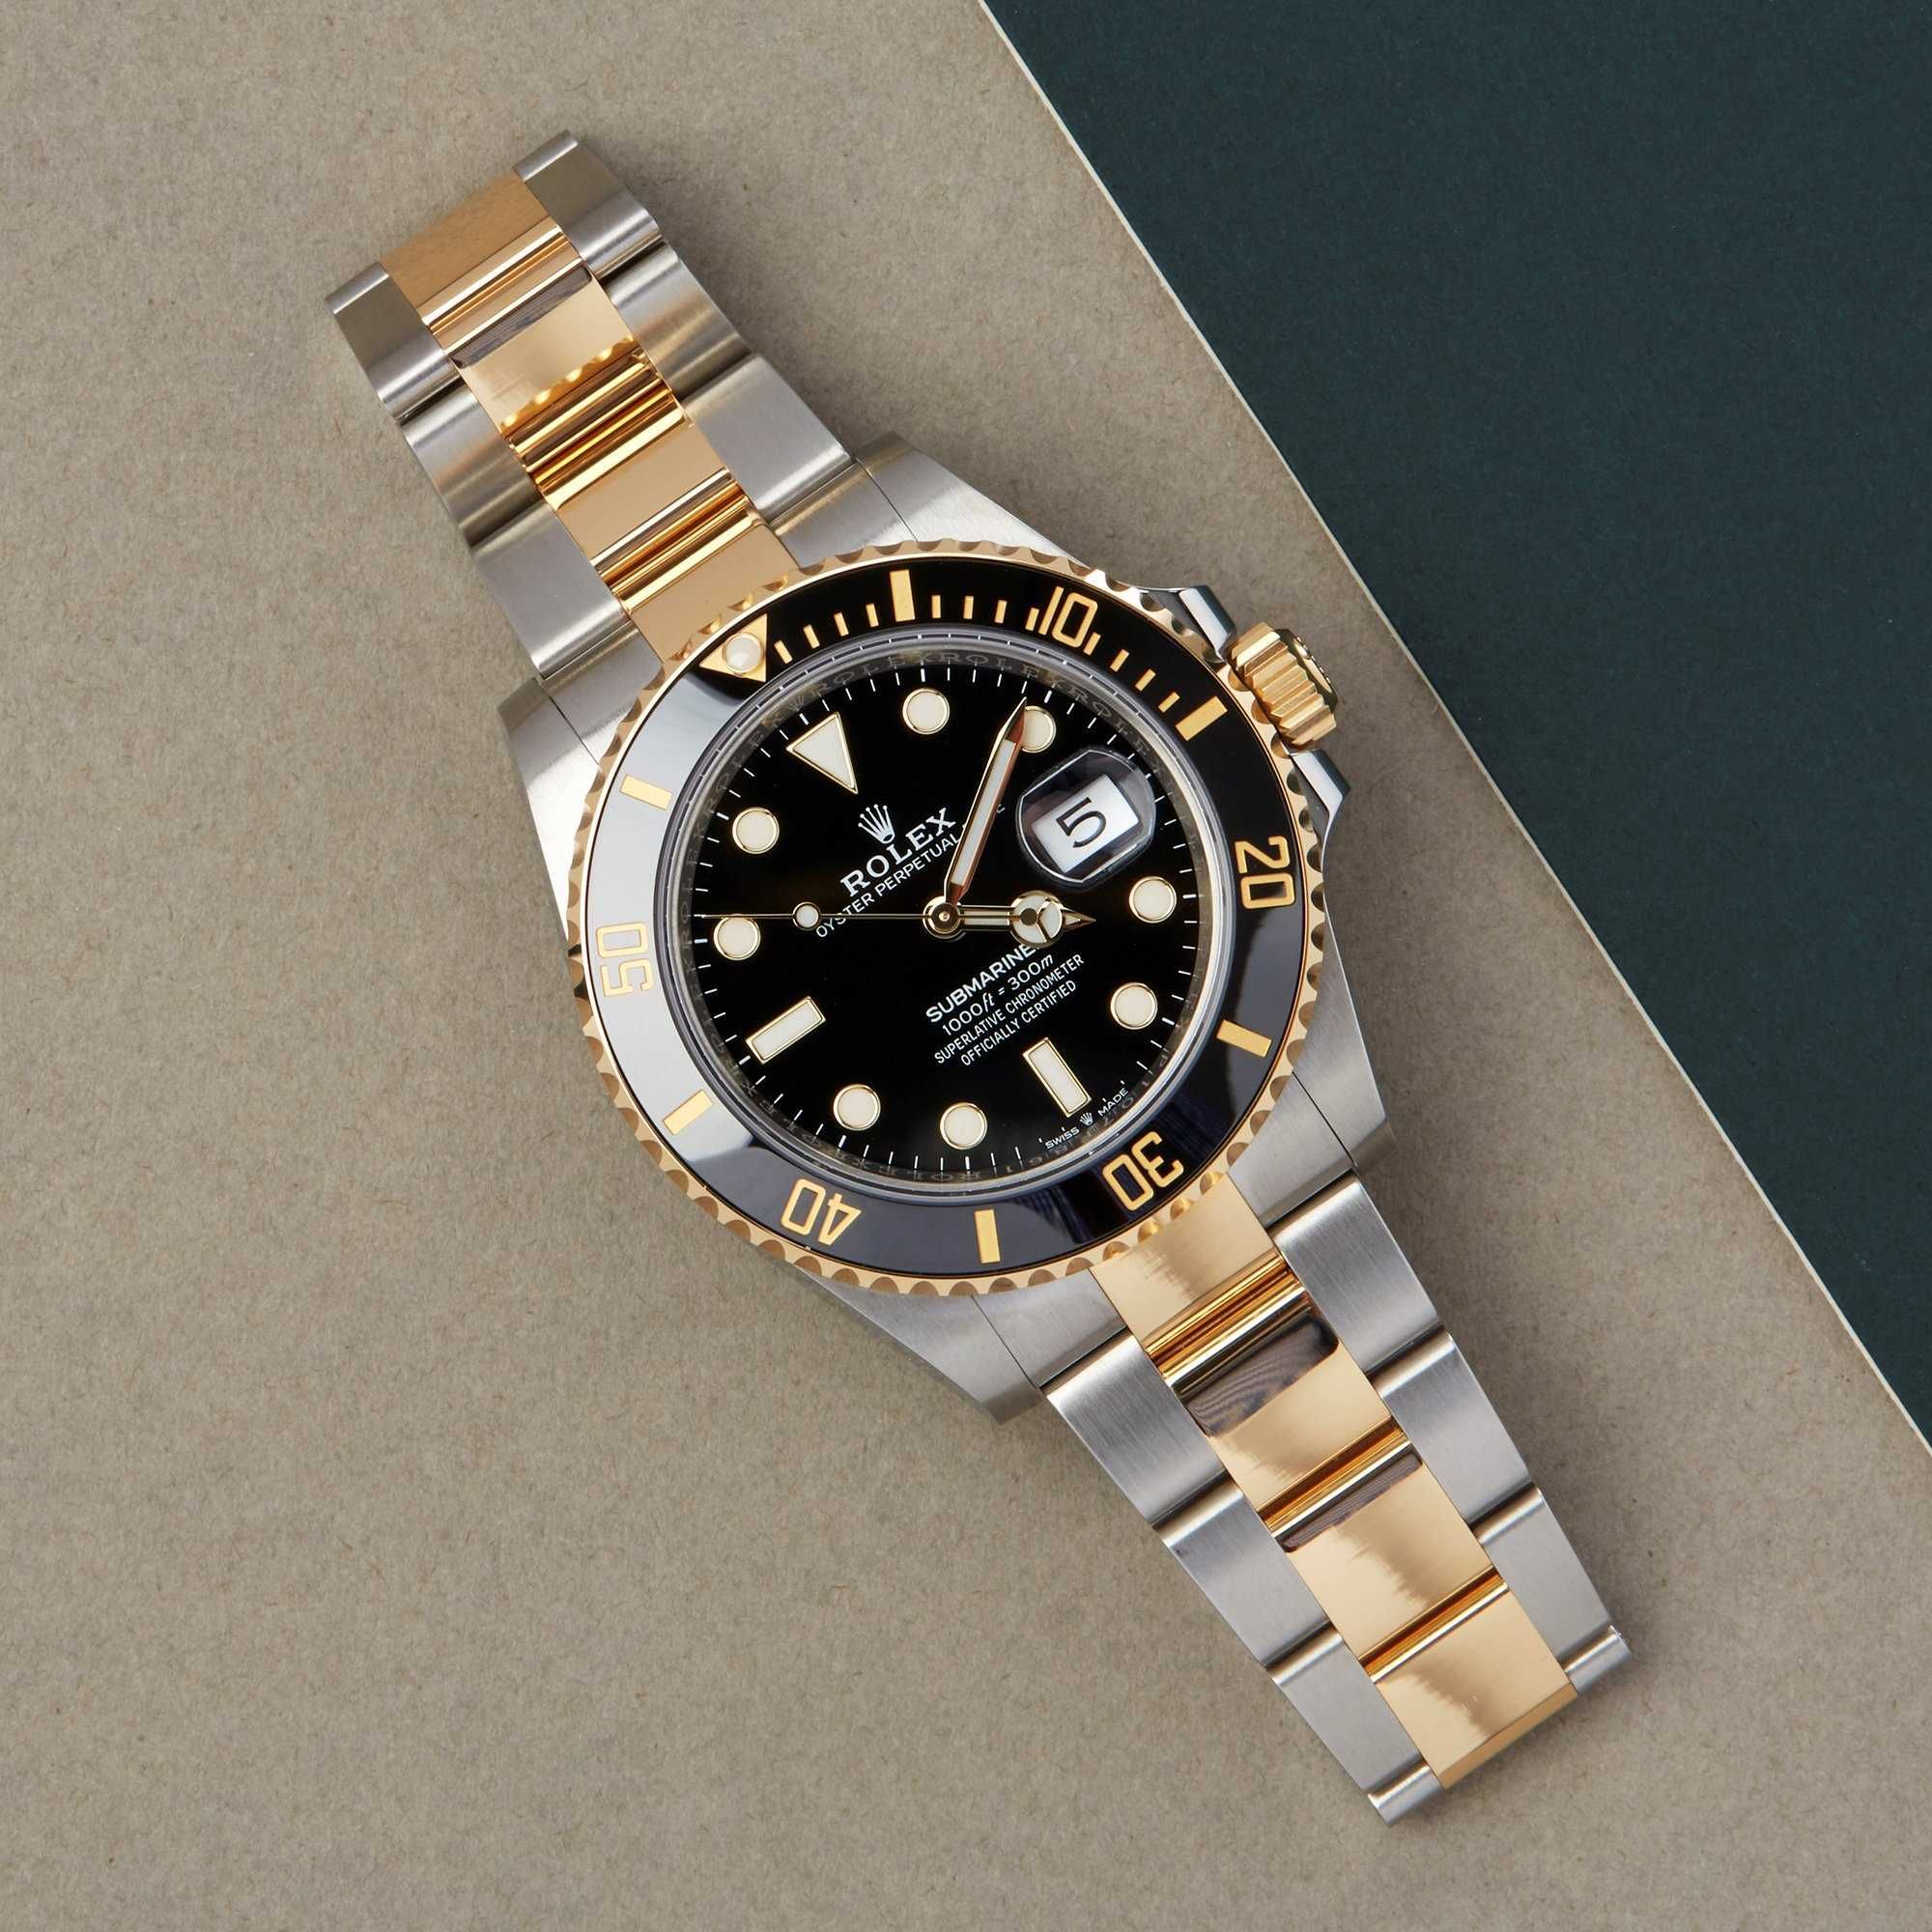 Rolex Submariner AUTOMATIC Gold/Silver Black Luxury 41 MM